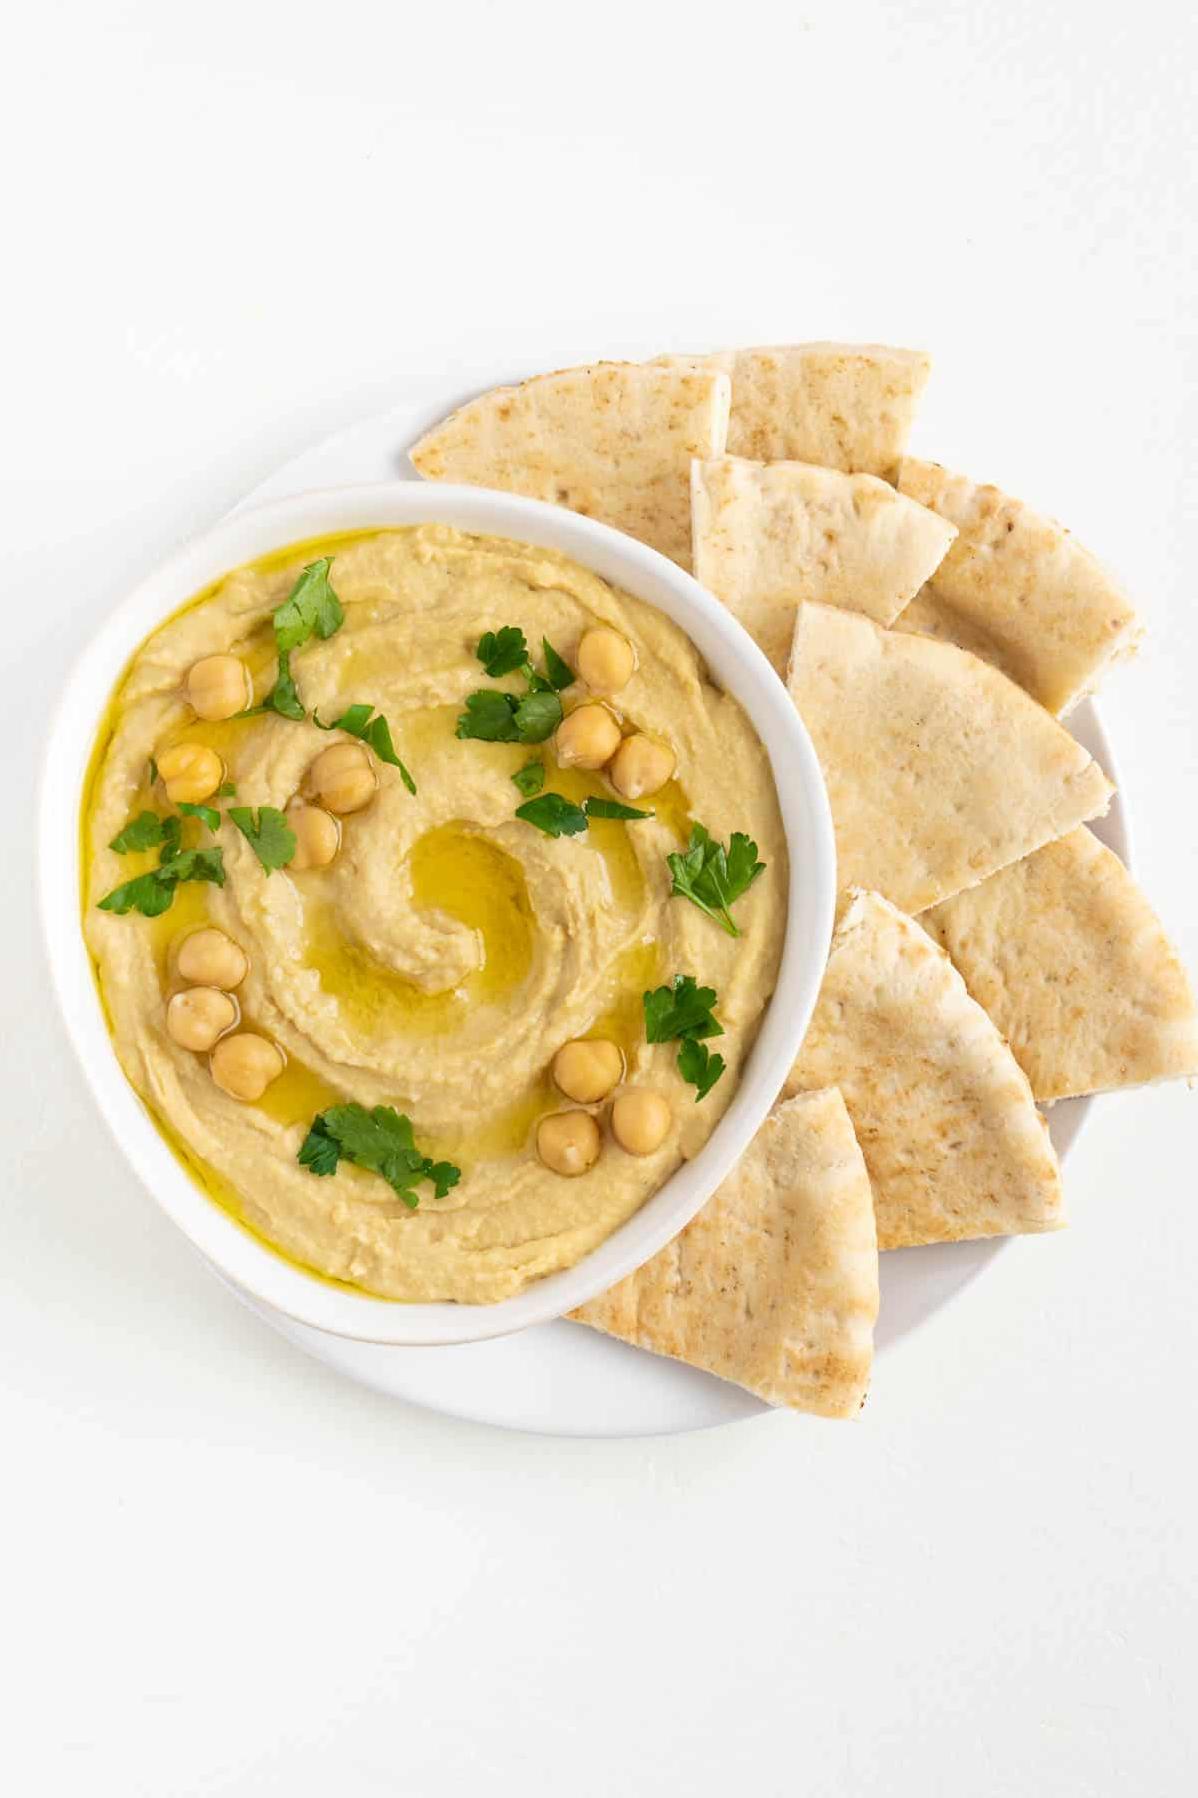  Pair it with some warm pita bread or fresh veggies for a perfect appetizer.